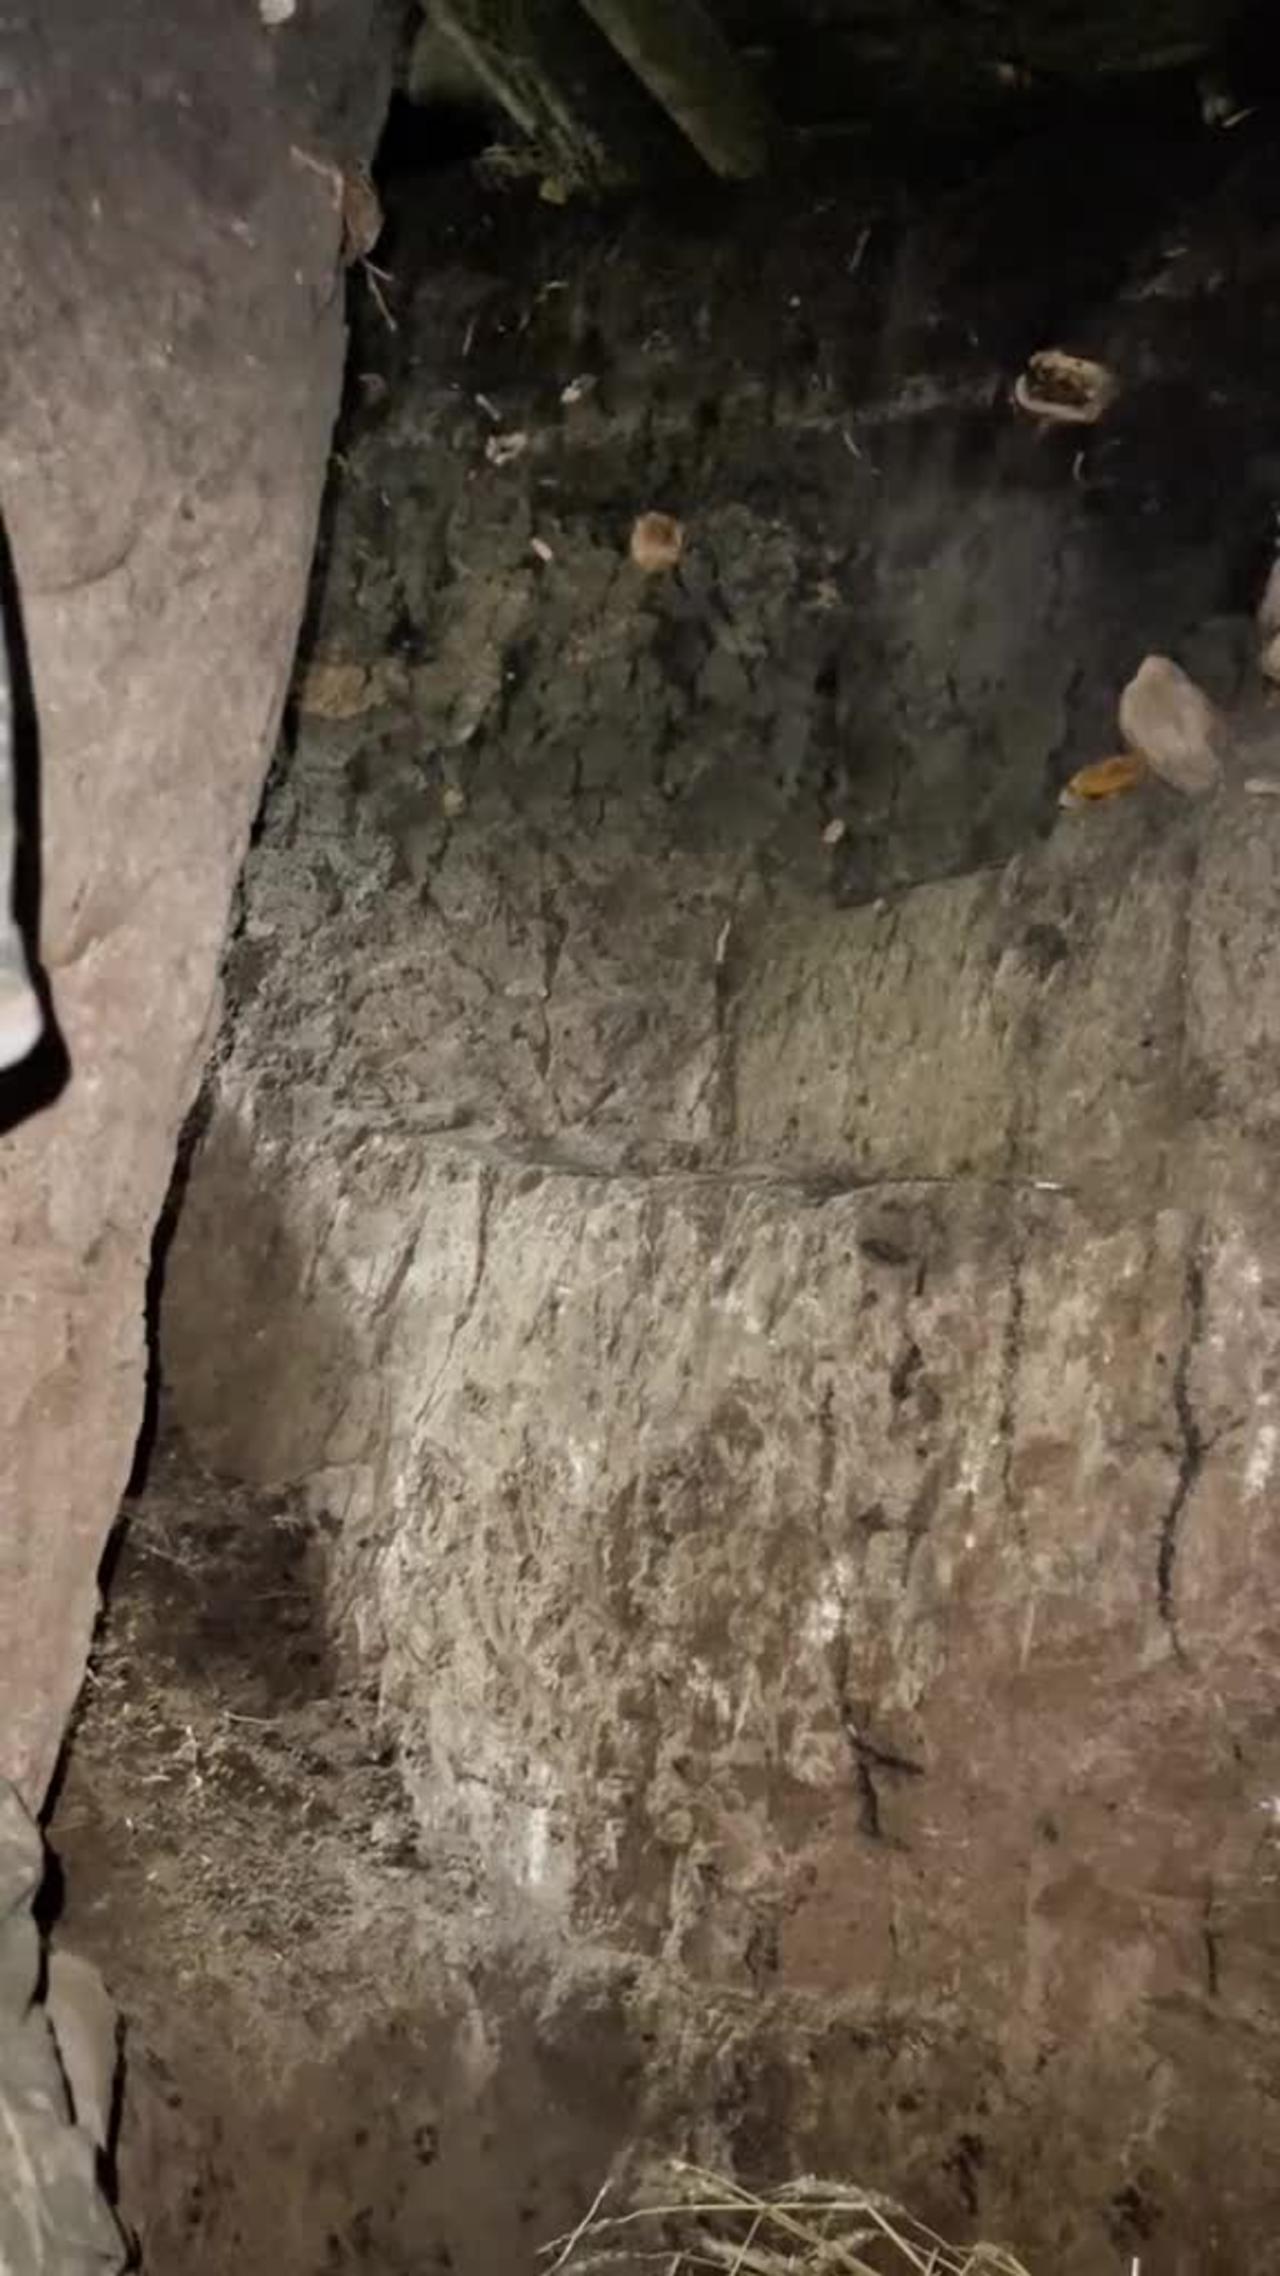 Ukrainian army men hiding and chilling in the cave